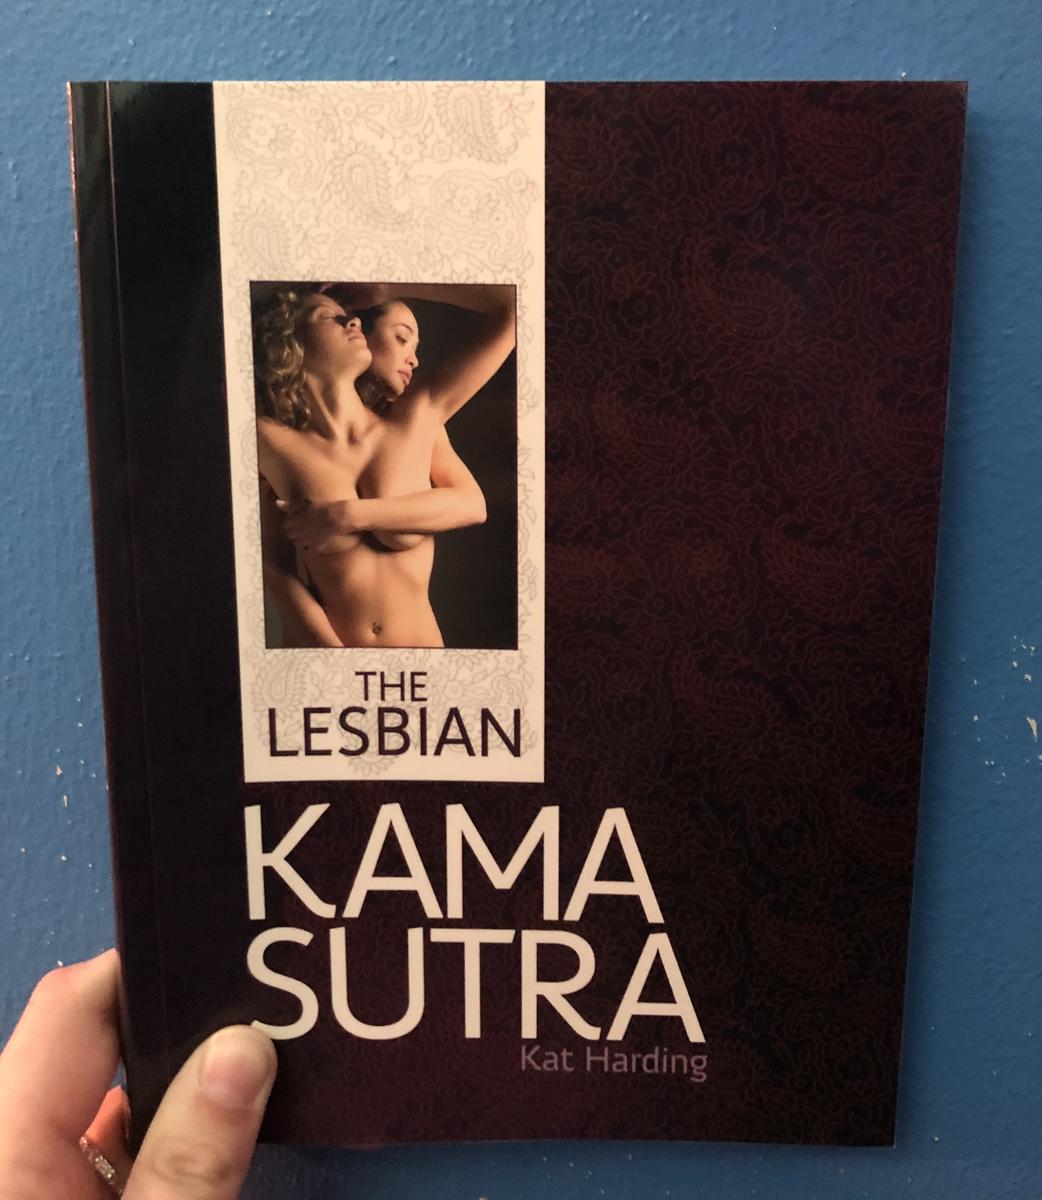 The kama sutra video